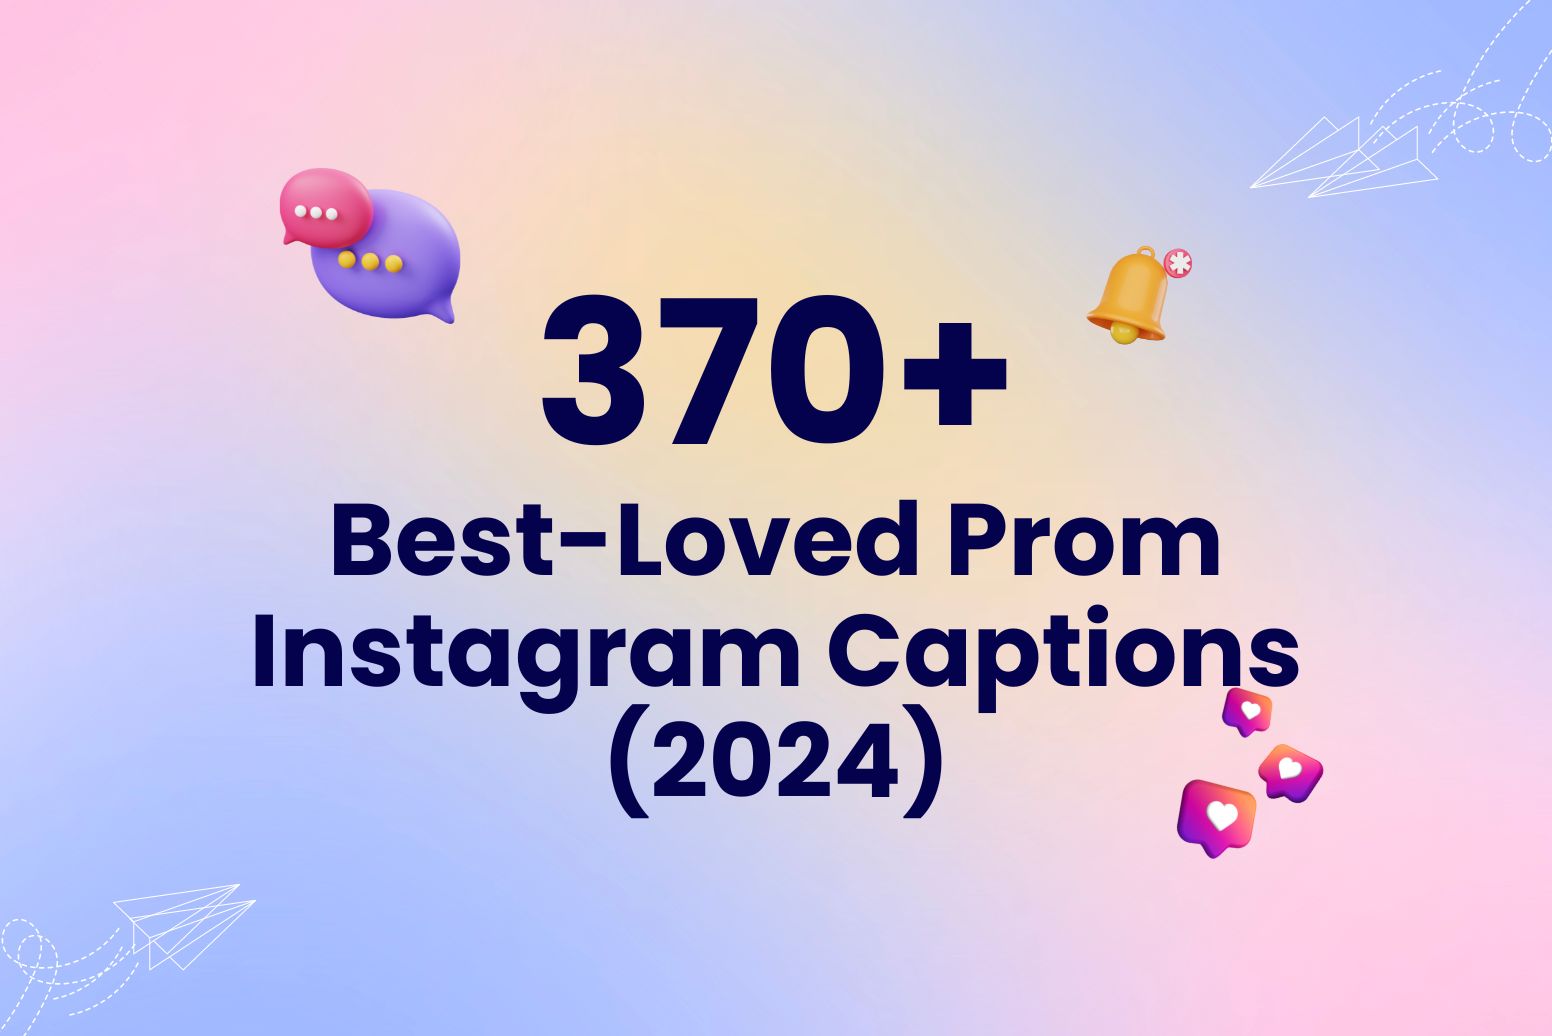 370+ Best-Loved Prom Captions for Your Instagram (2024)